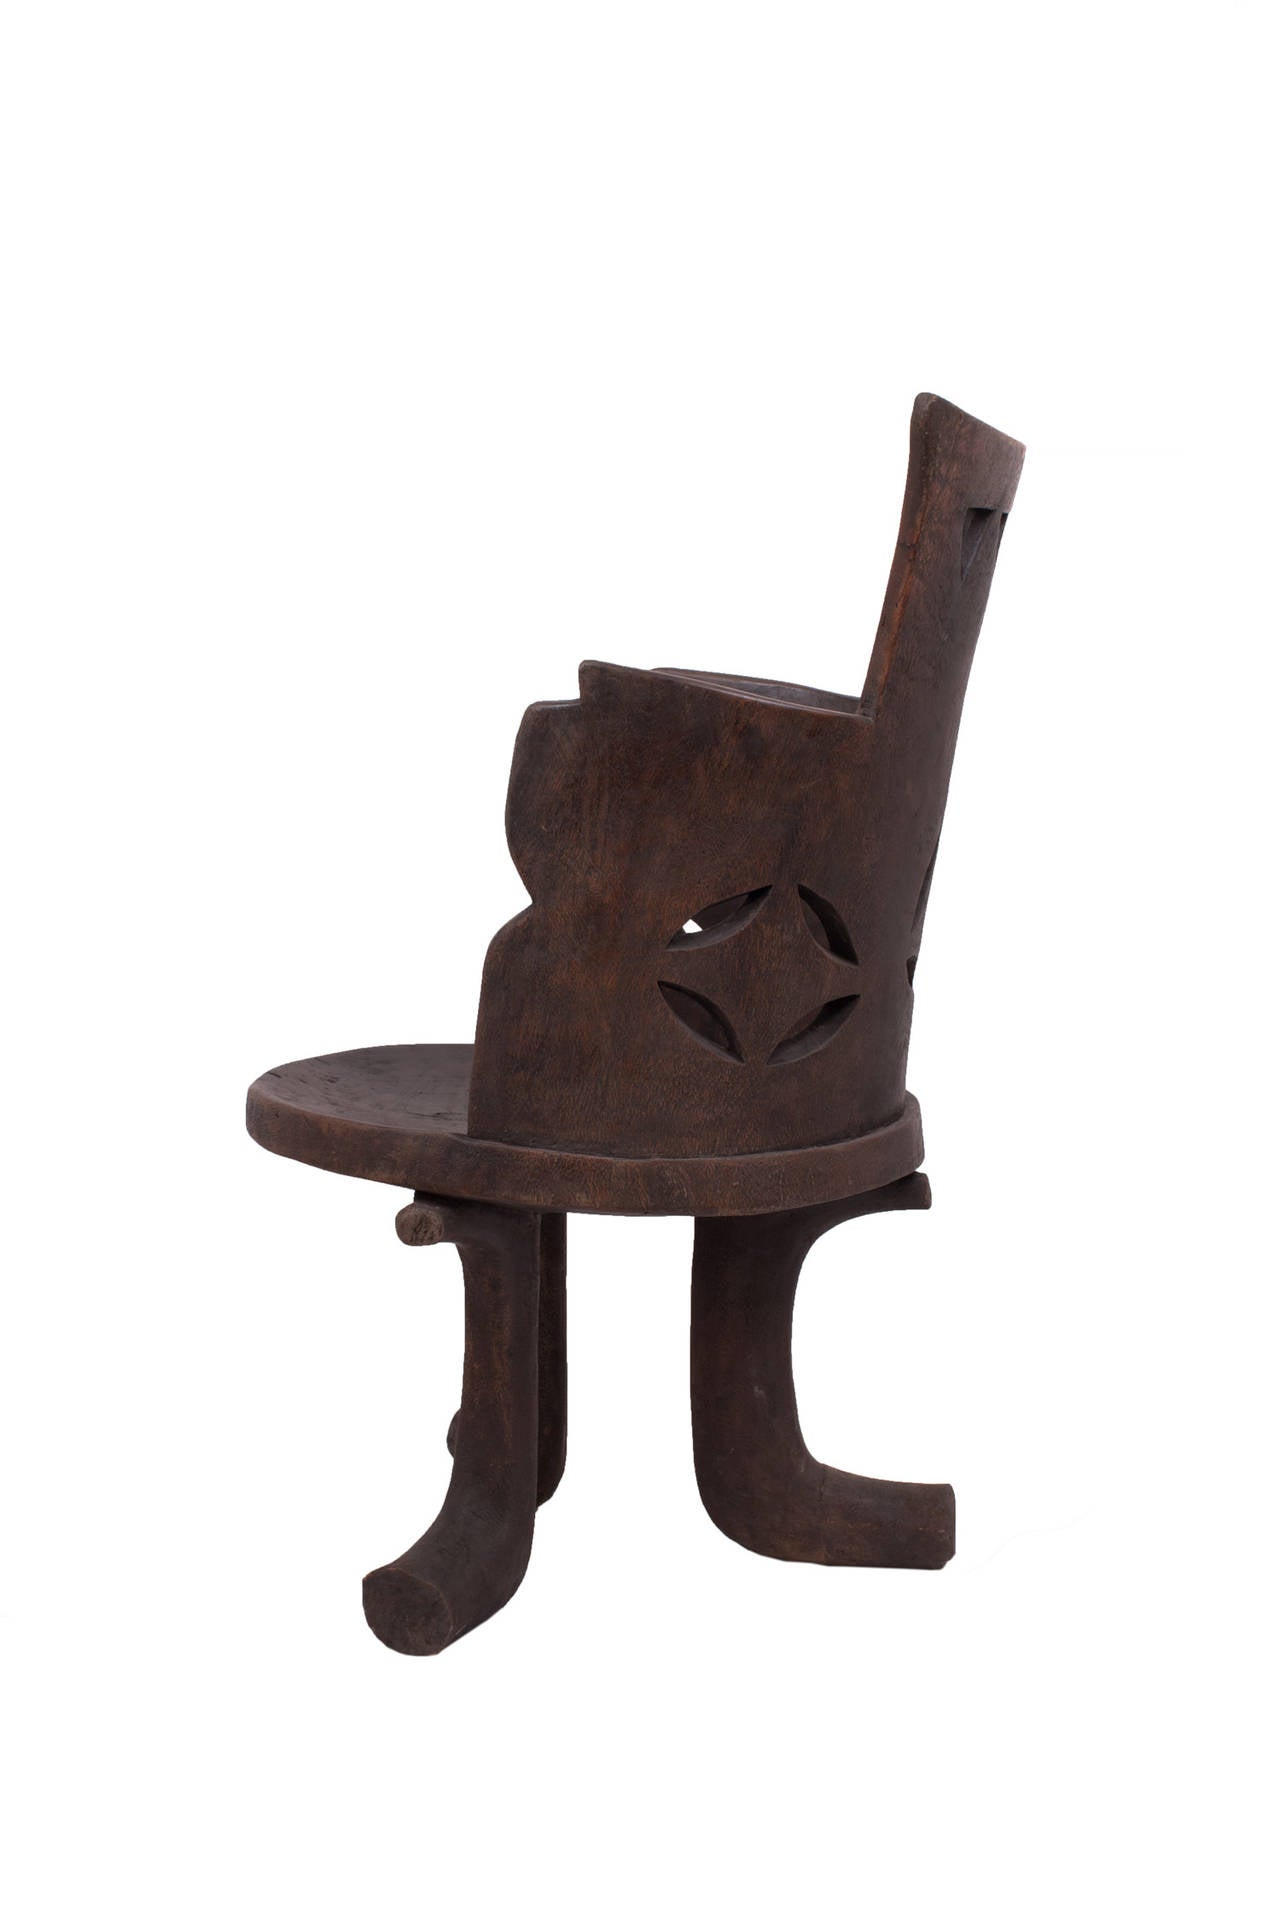 Hand-Carved Traditional Ethiopian Wood Chair